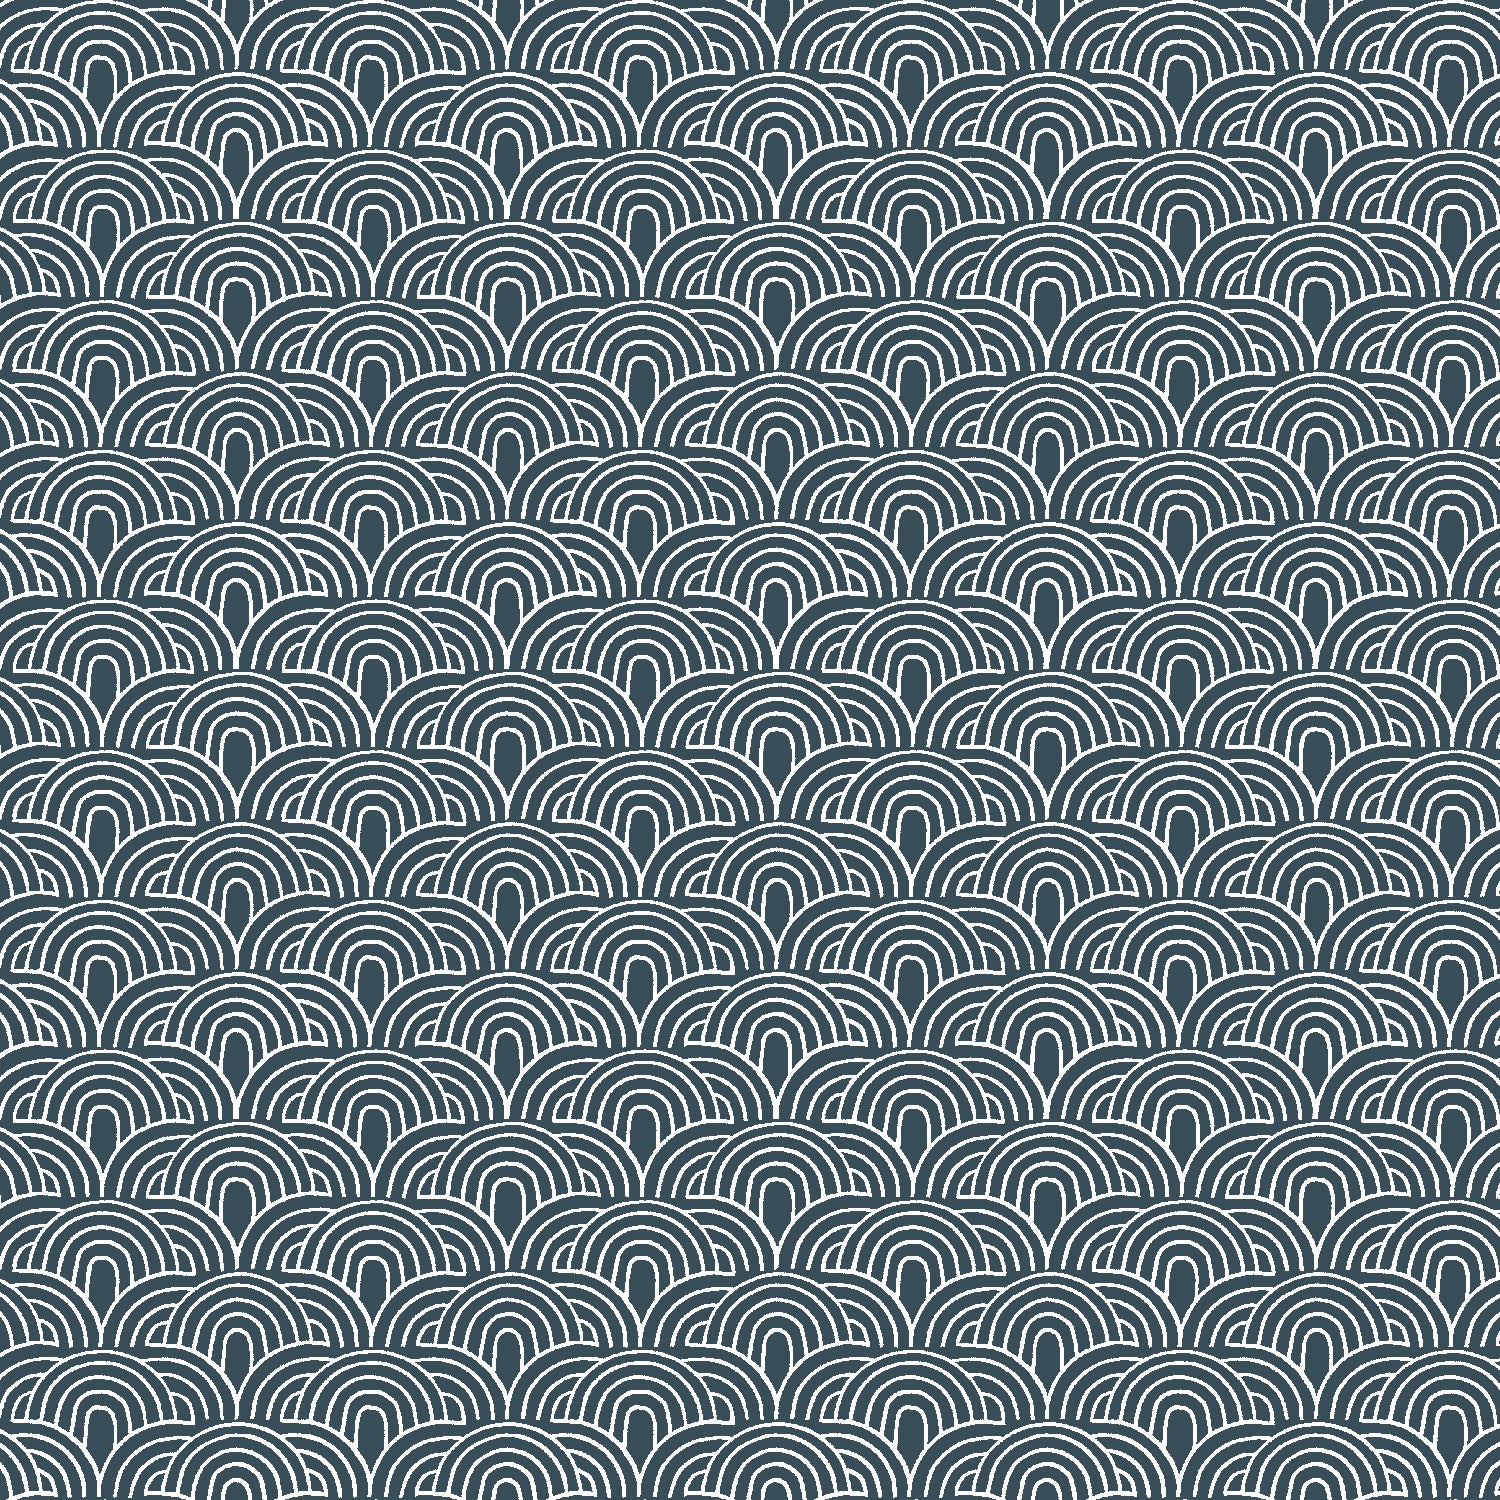 A Day Away Quilt Fabric - Double Arches in Rainstorm Gray - RF104-RA1